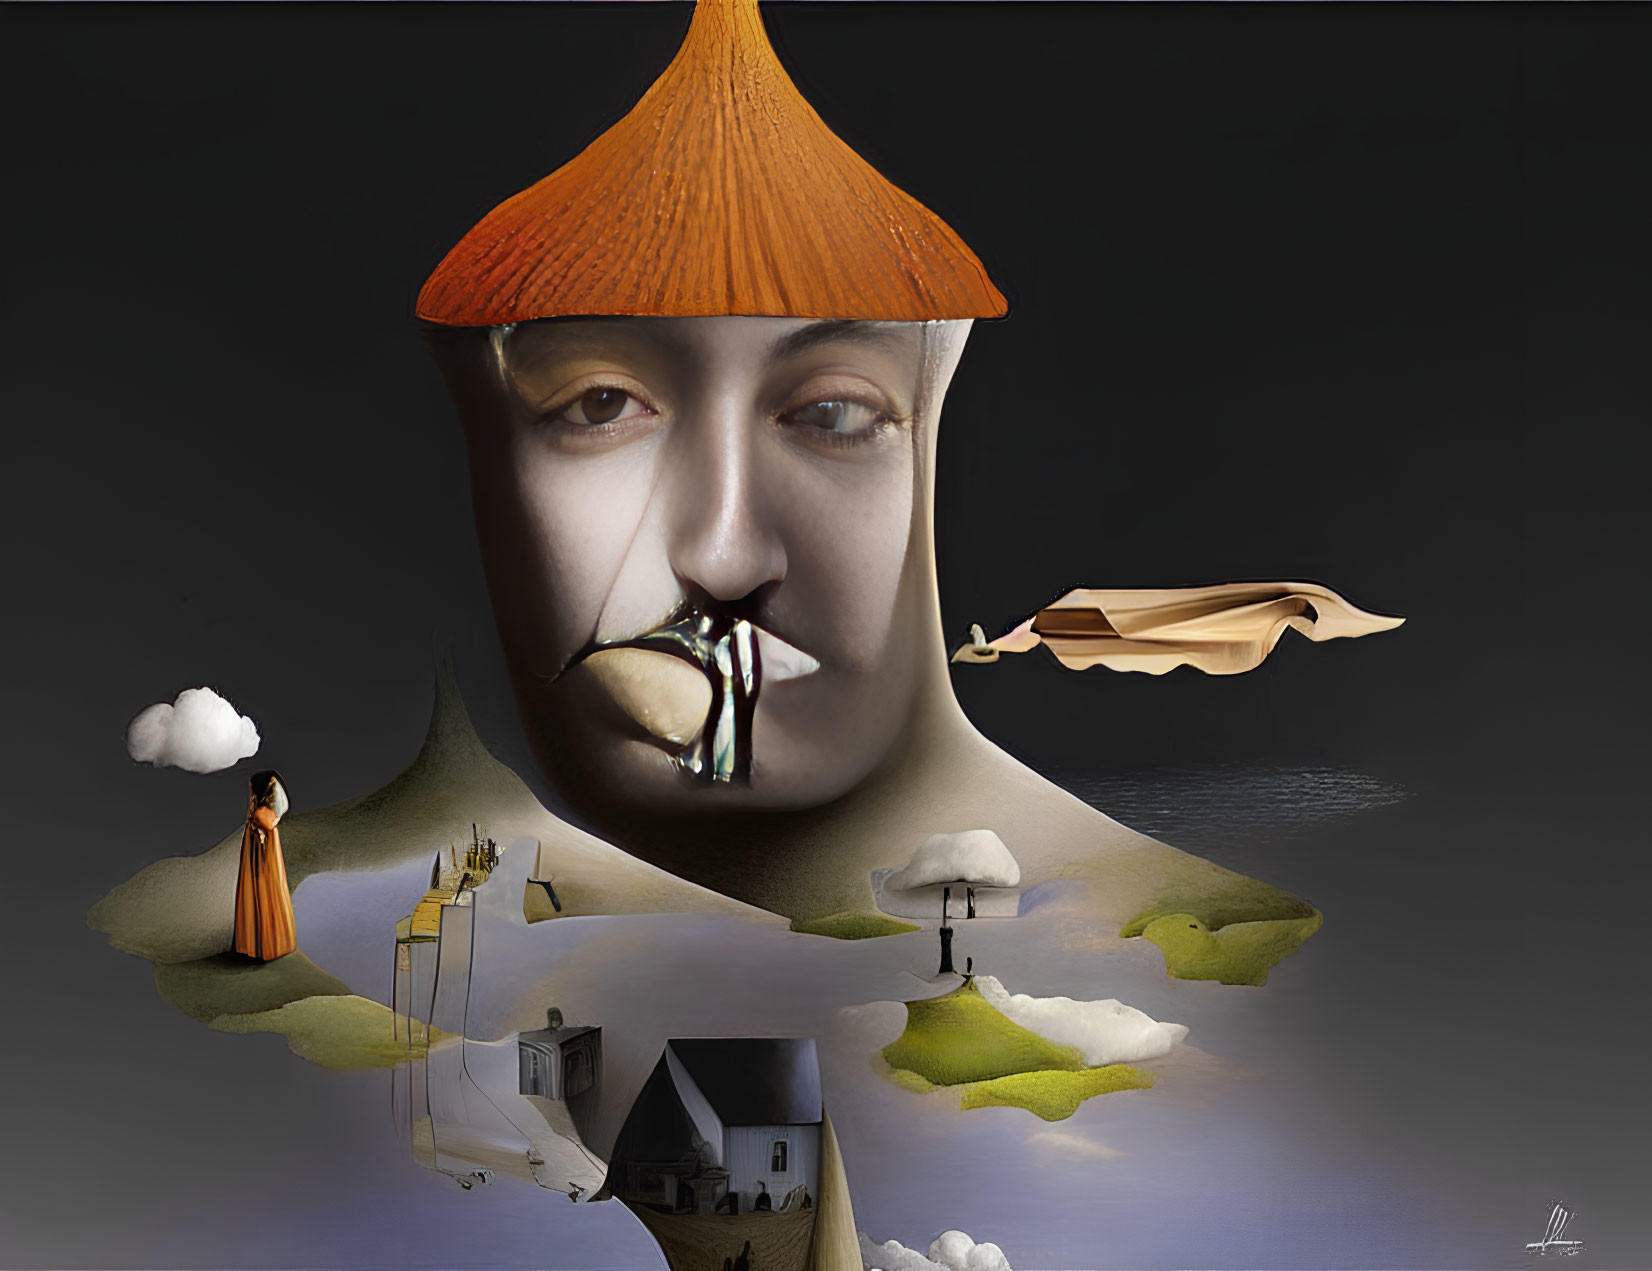 Surreal artwork: face with roof hat, clouds, water, boat, houses integrated.